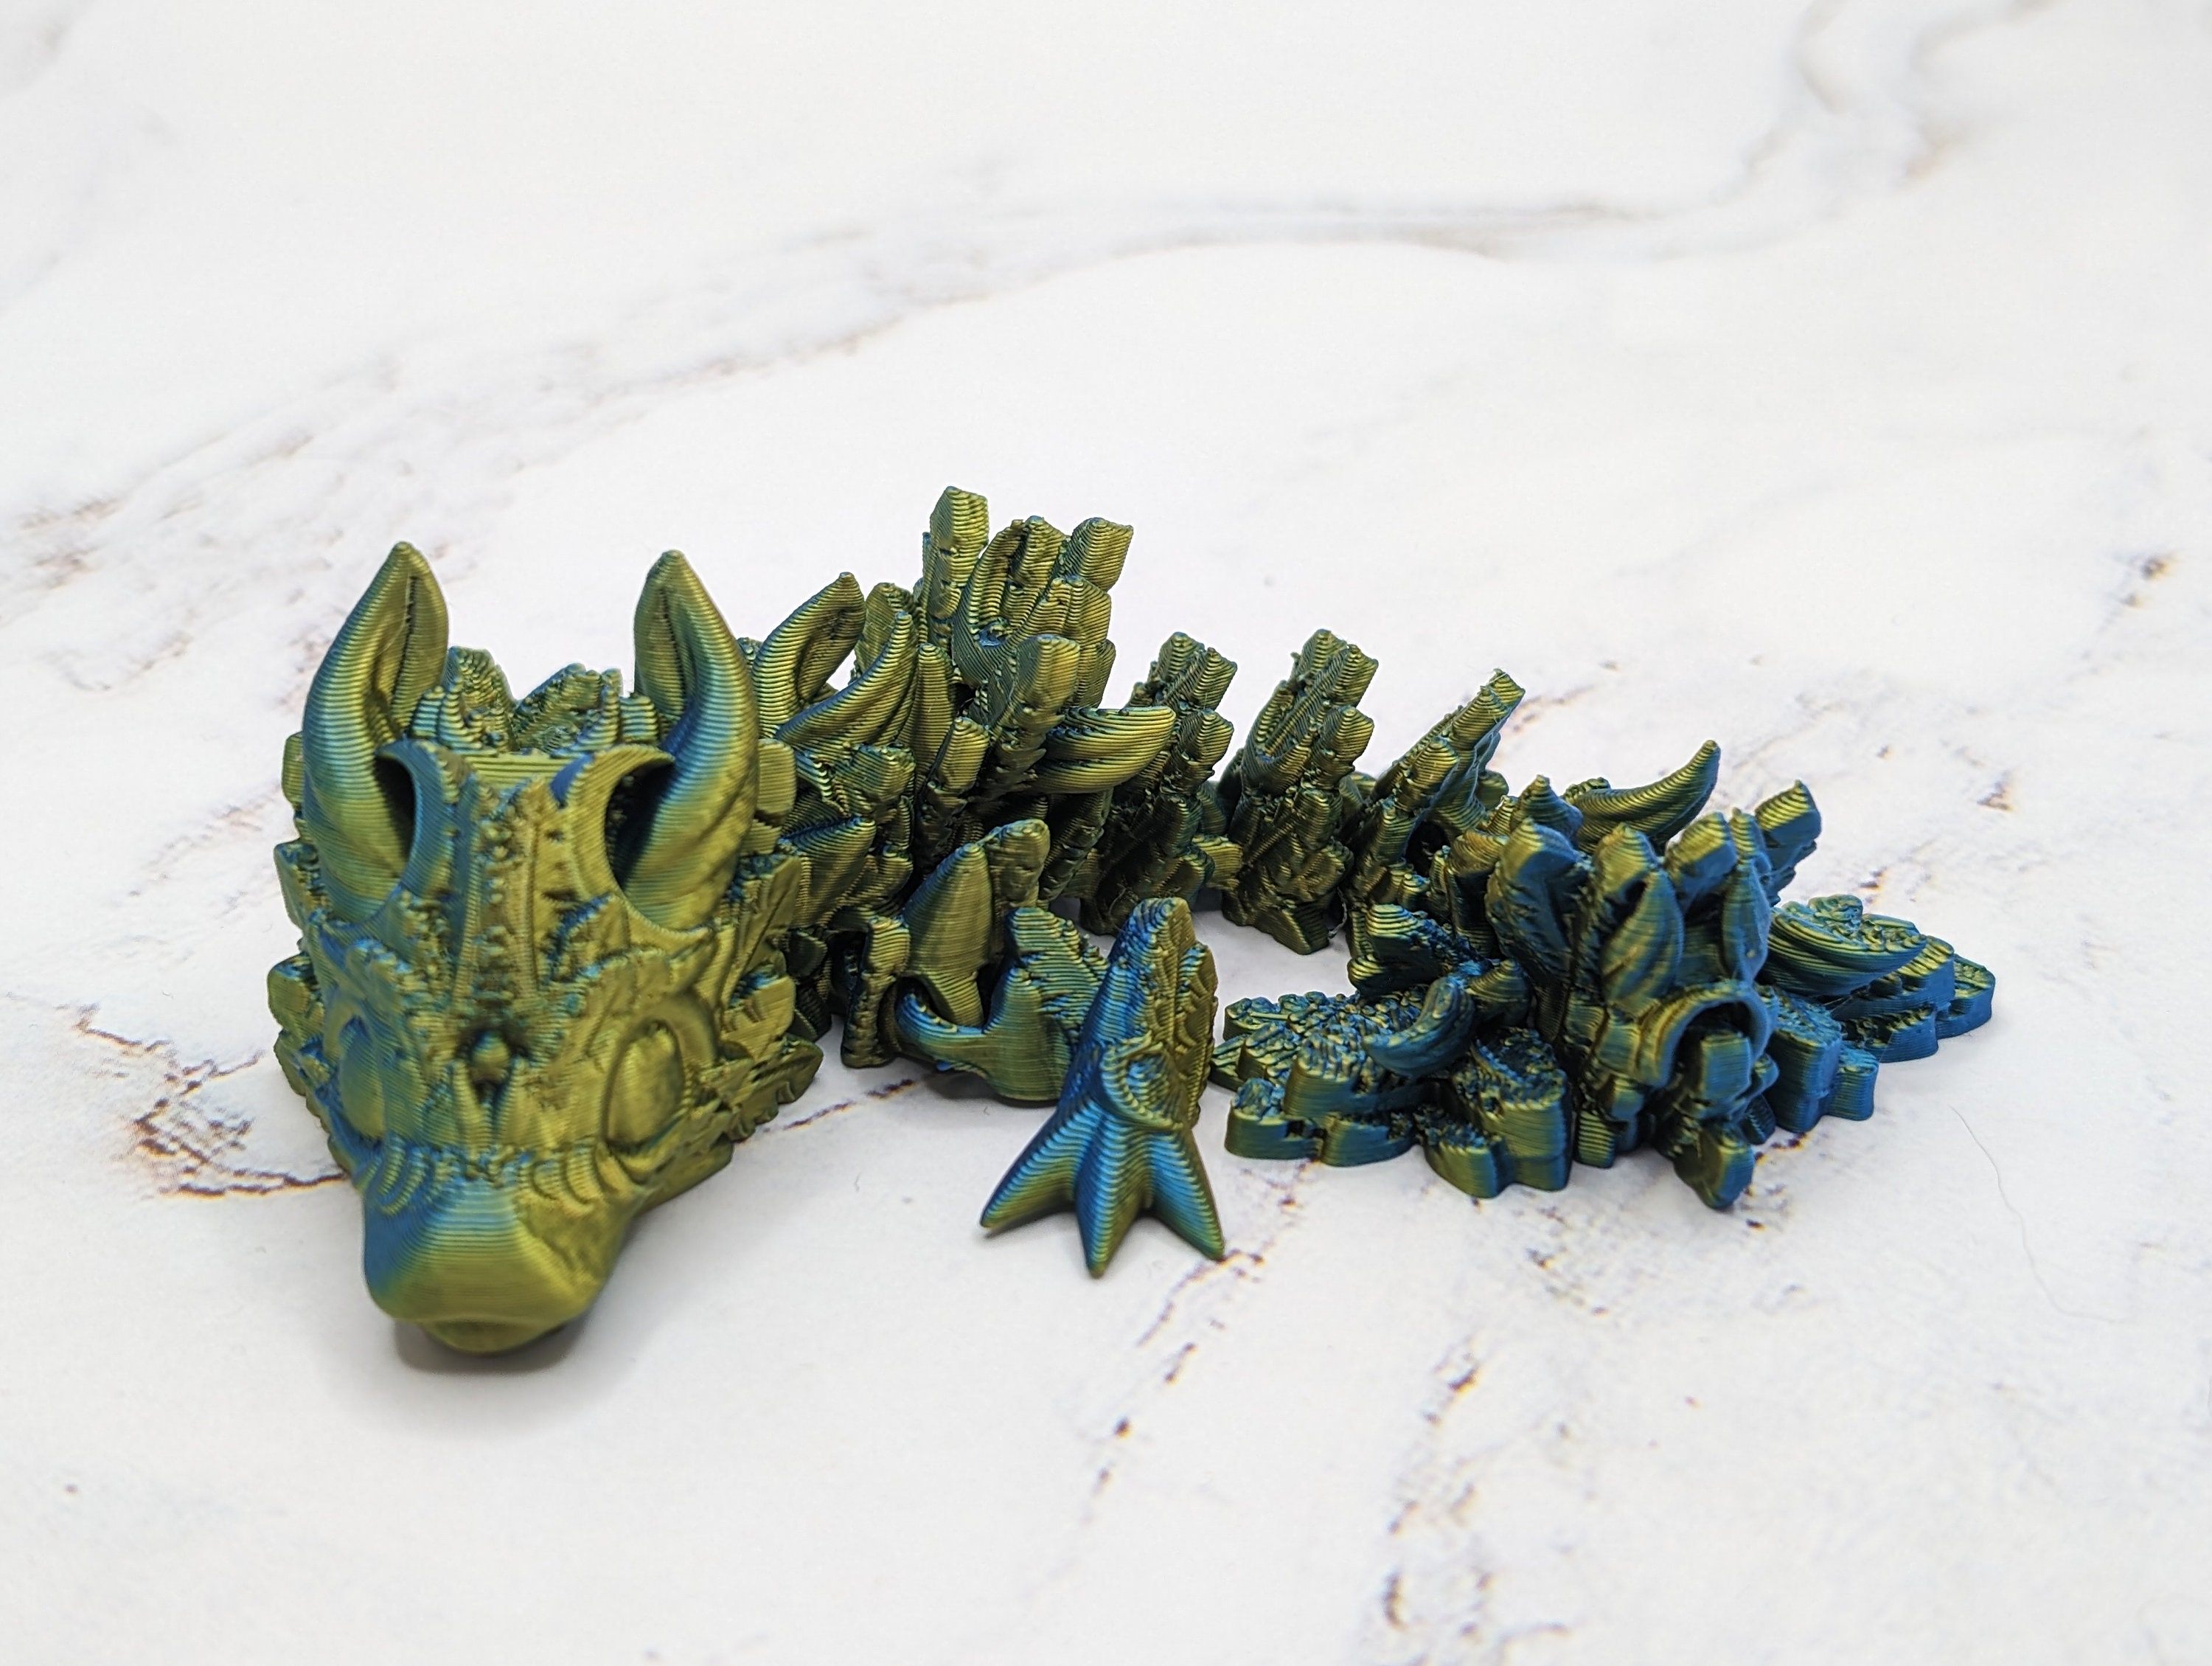 Baby Crystal Dragon, Articulated 3D printed Crystal Dragon